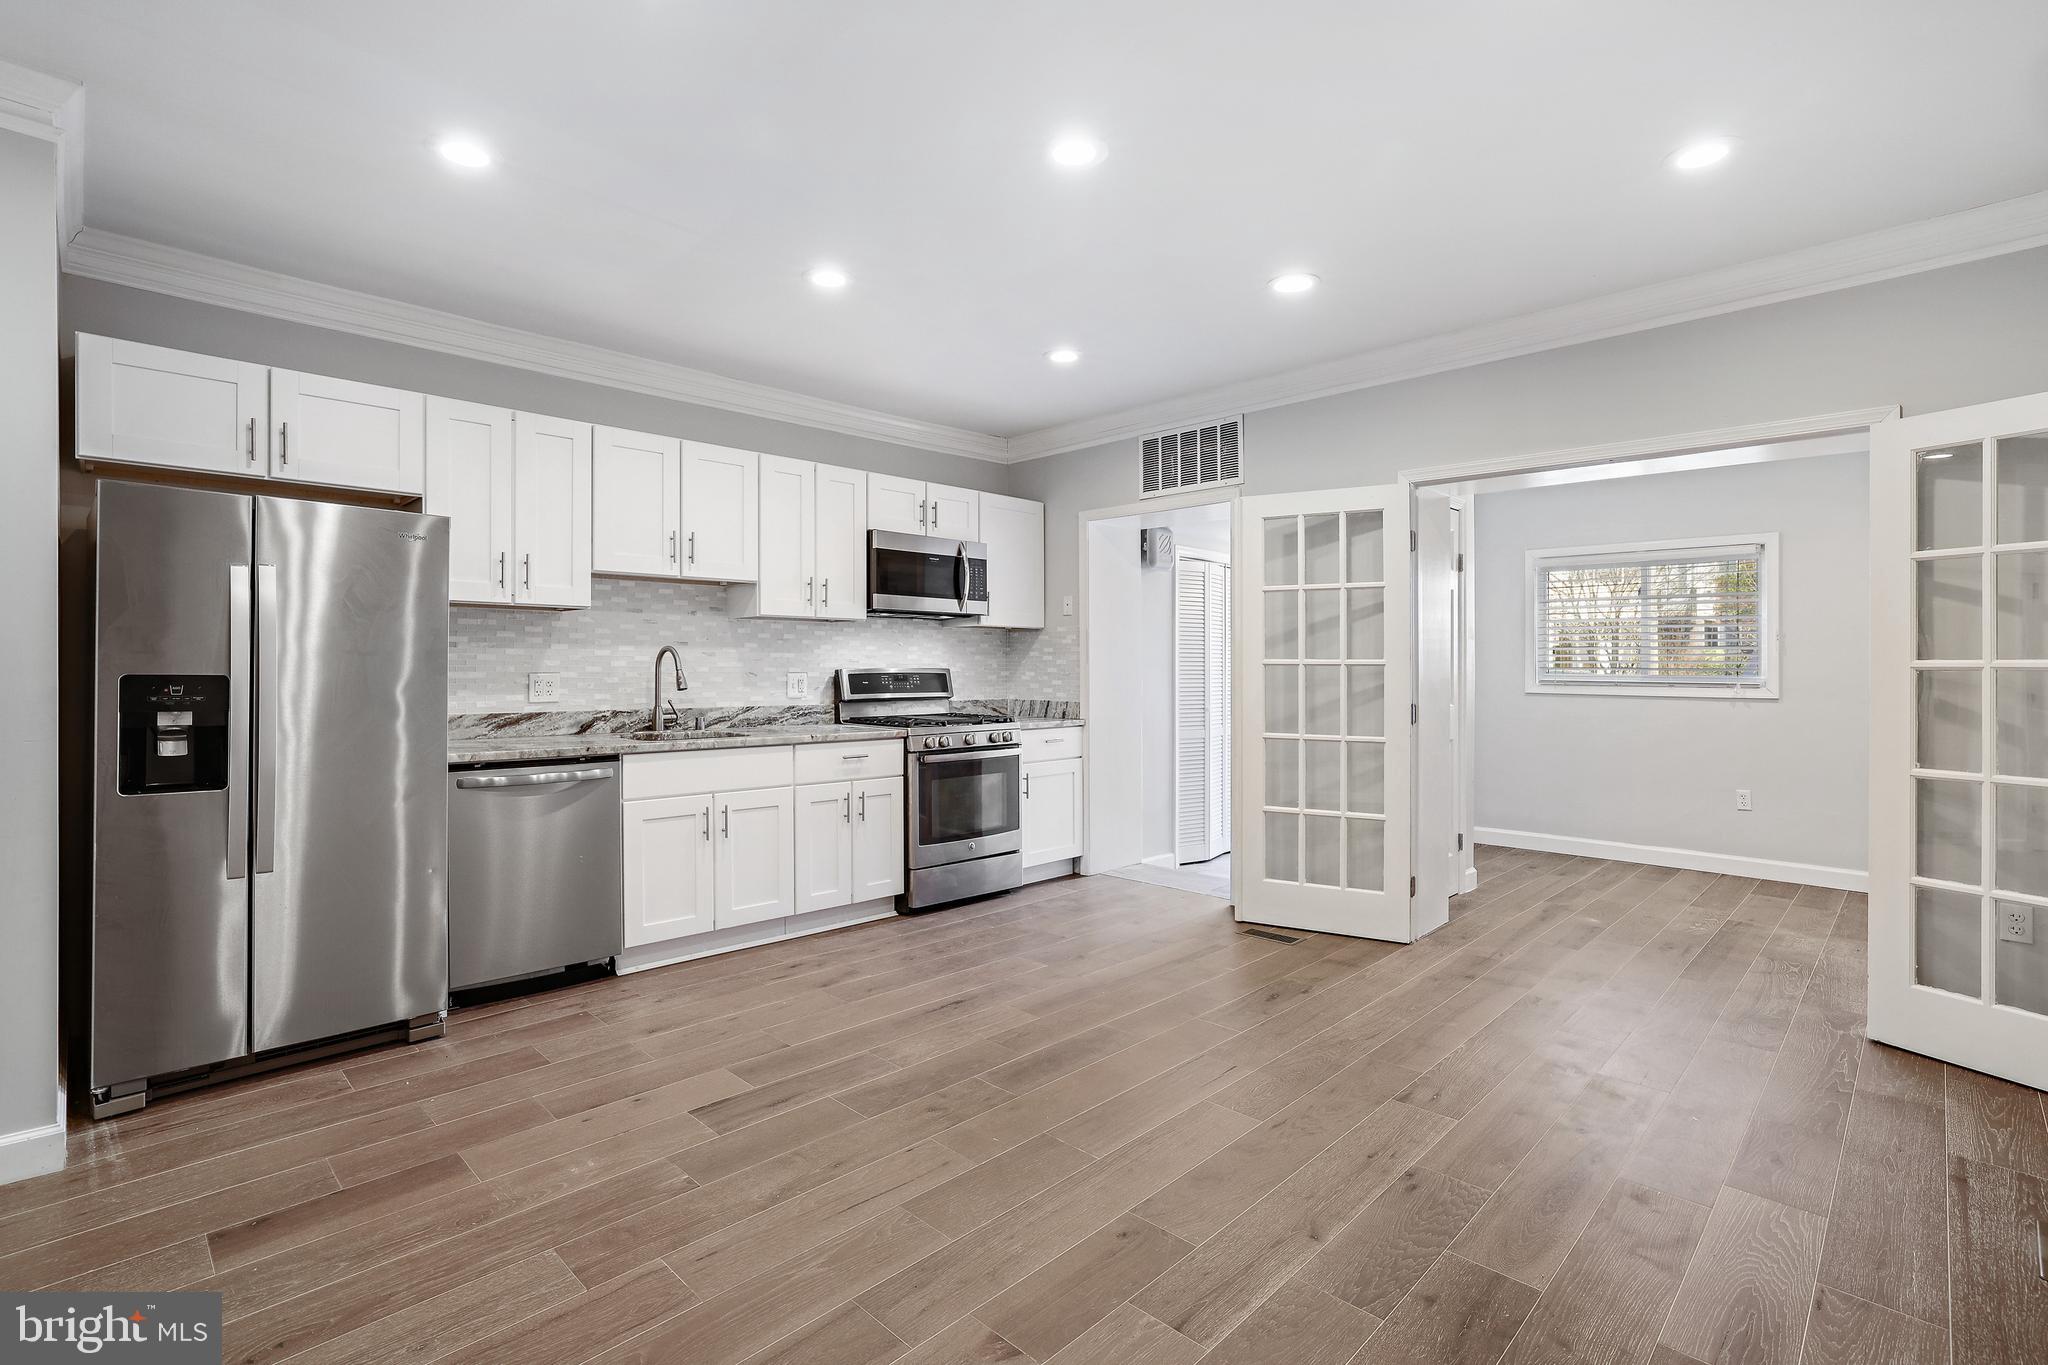 a kitchen with wooden floors white cabinets and stainless steel appliances